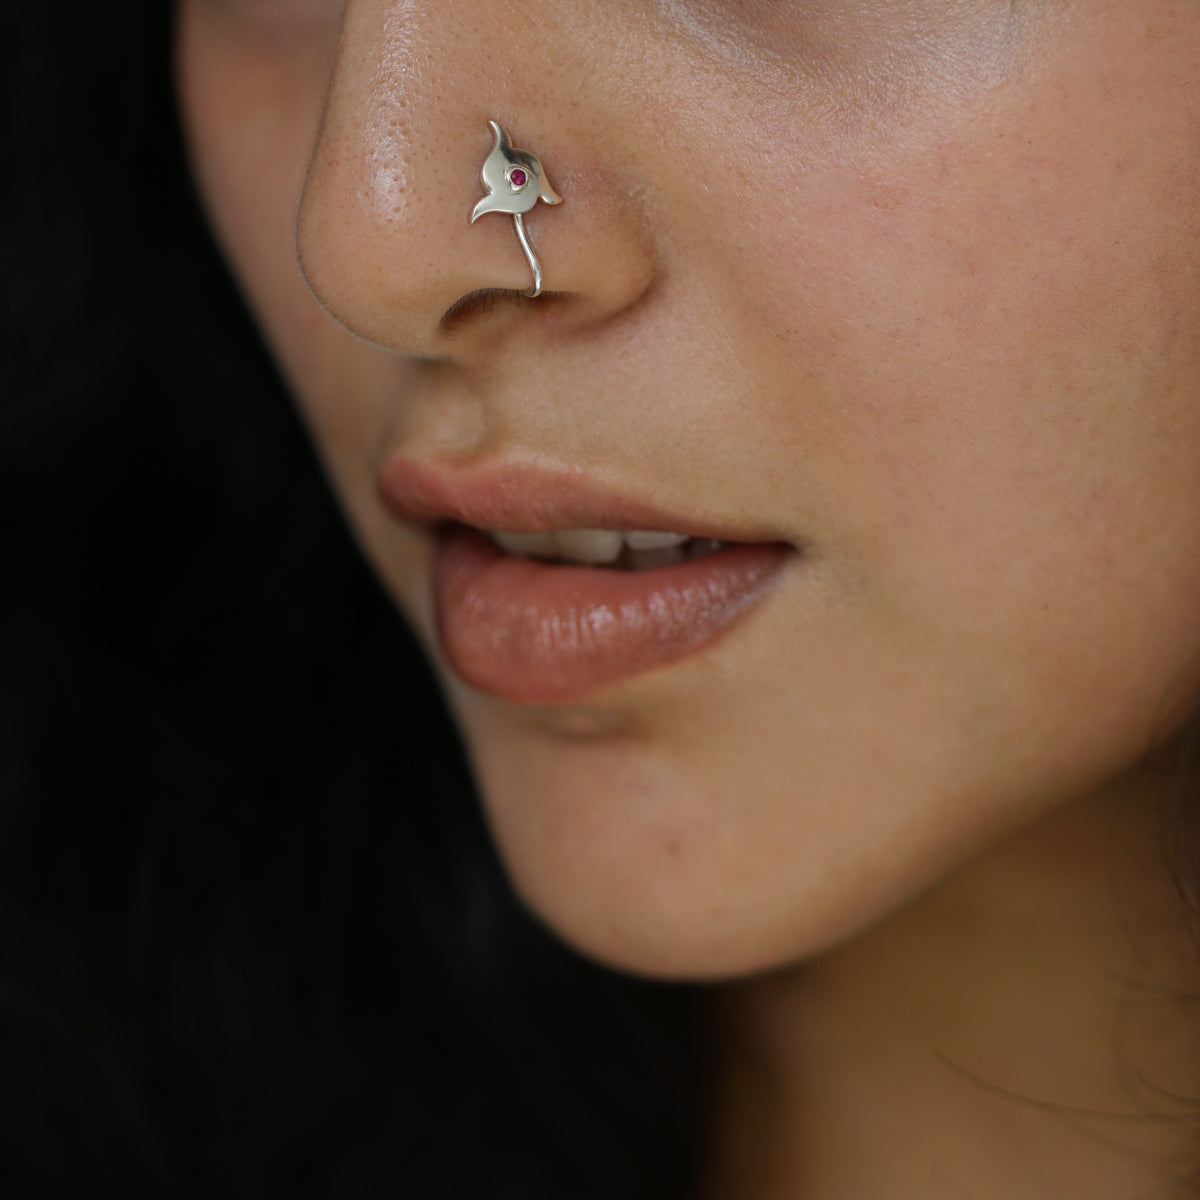 Small Indian Nose Pin, 14k Solid Gold Nose Stud, Indian Nose Jewelry, Small Nose  Piercing, Indian Tragus Piercing, Gold Nose Stud, SKU 32 - Etsy